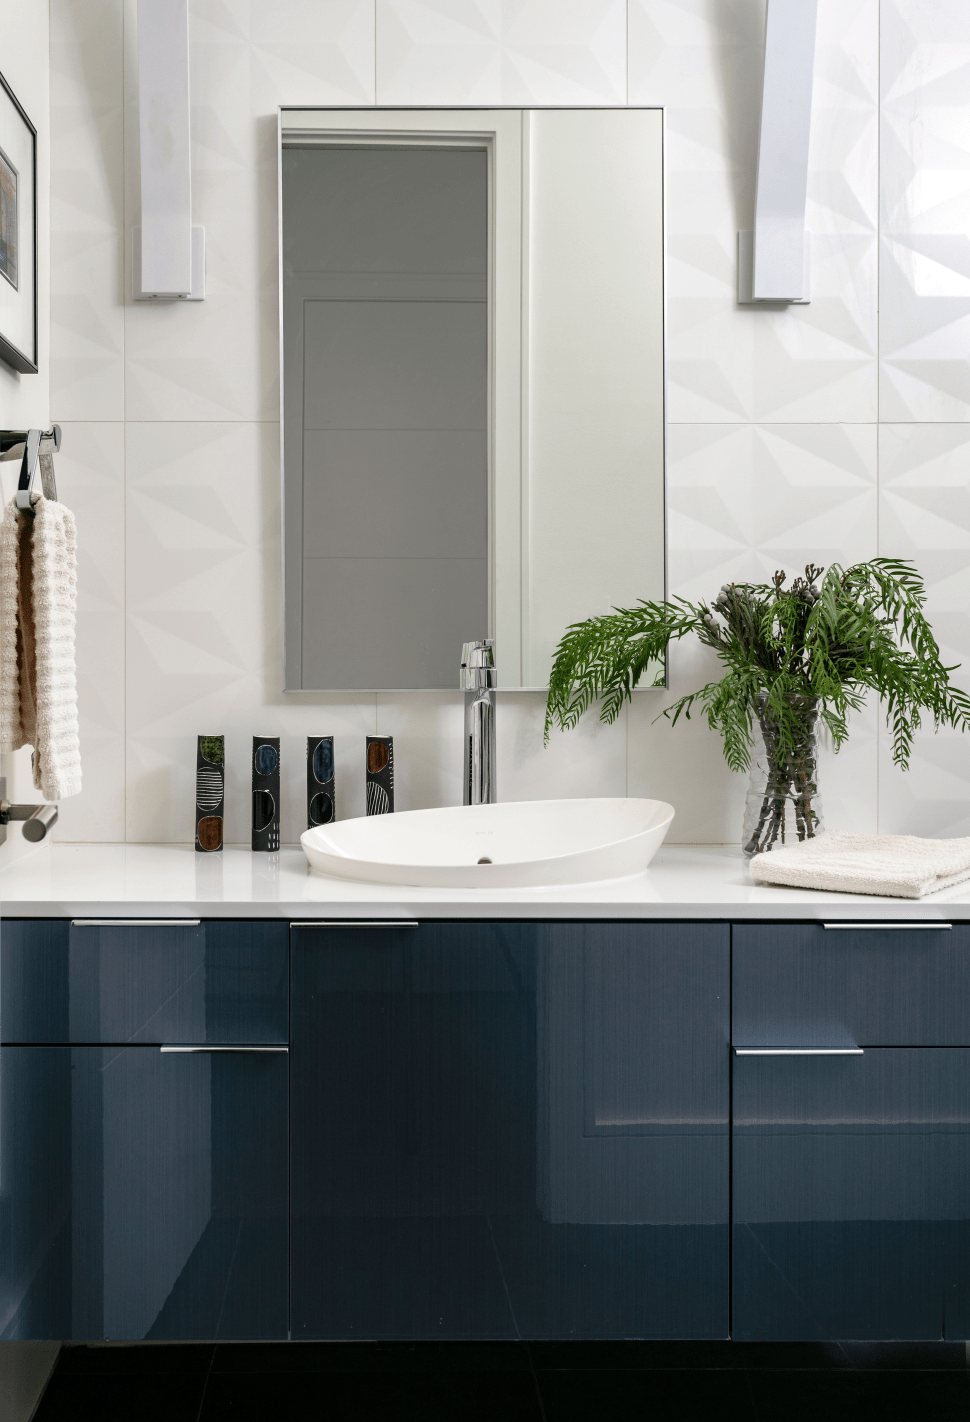 Small powder bath with blue cabinets, white countertop, and white wall tiles by LauraU